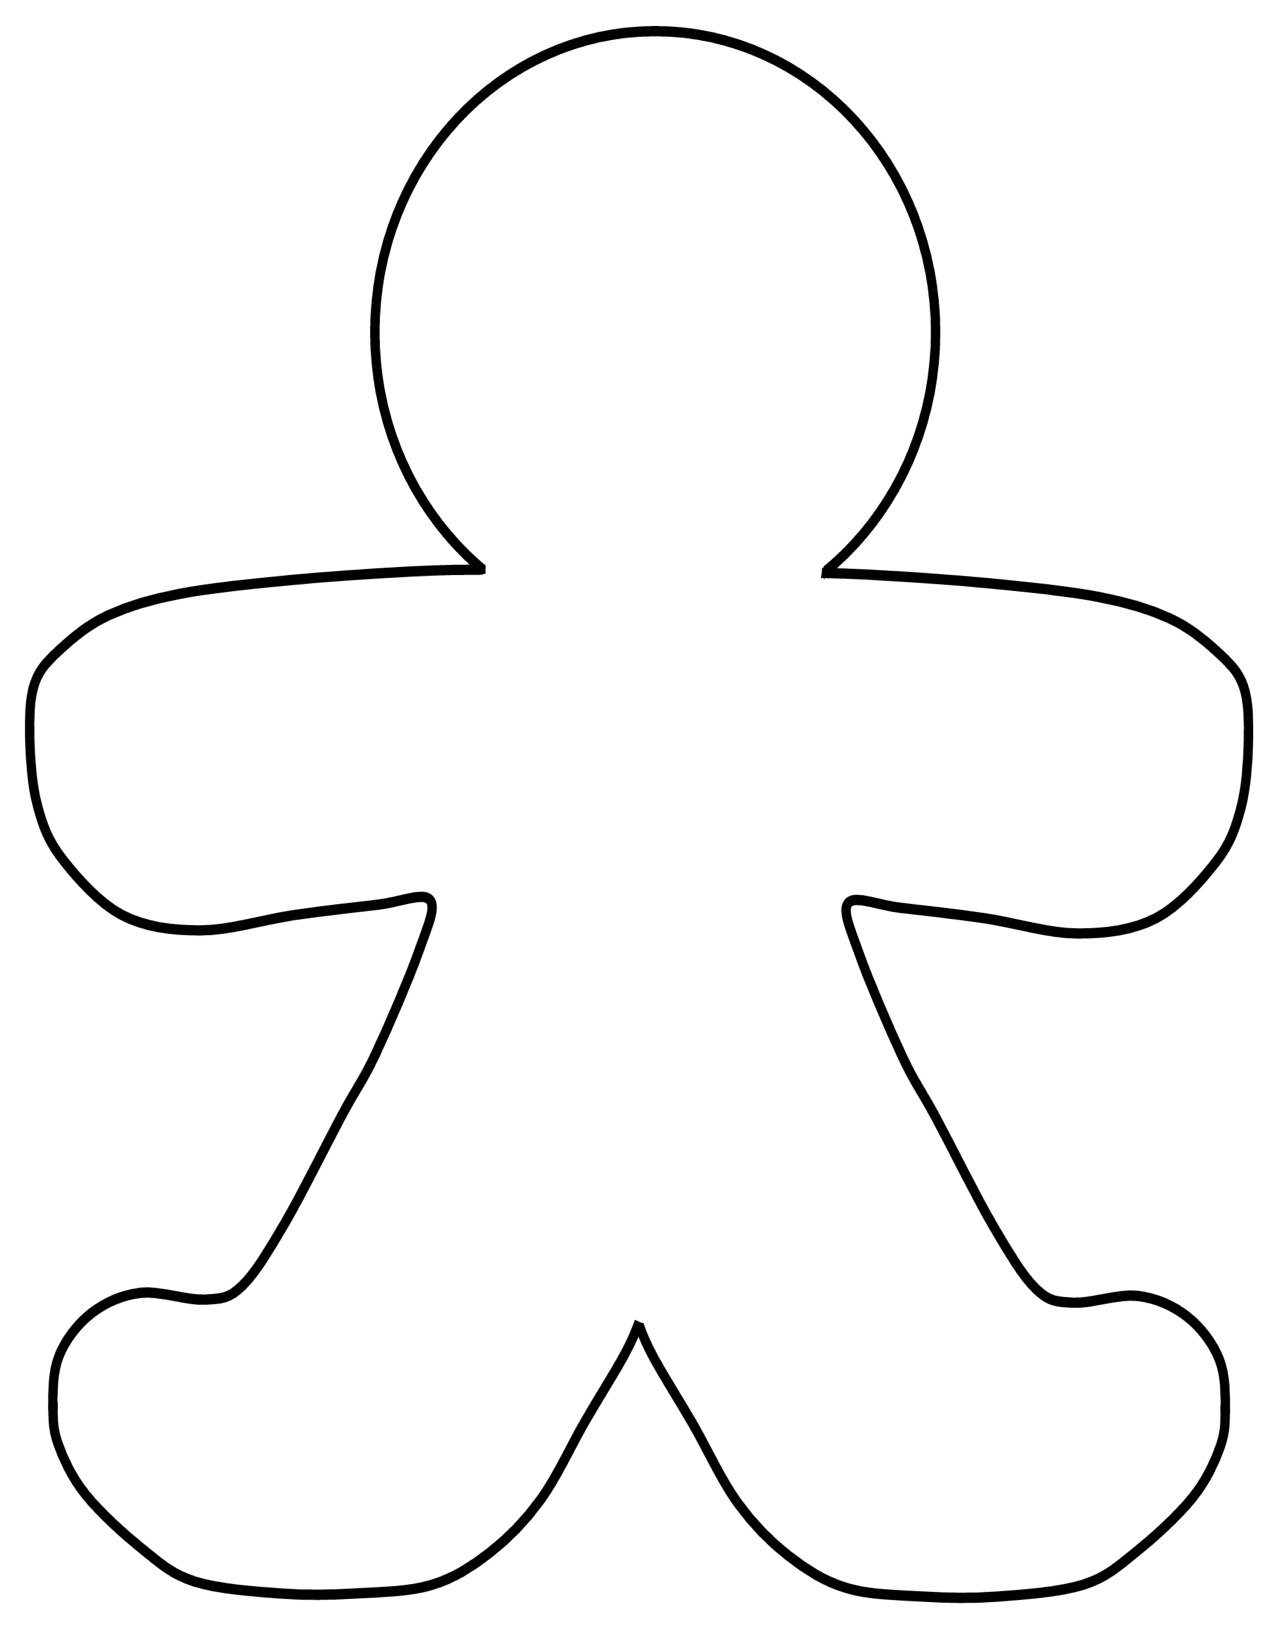 Human Body Outline Template - Clipart library